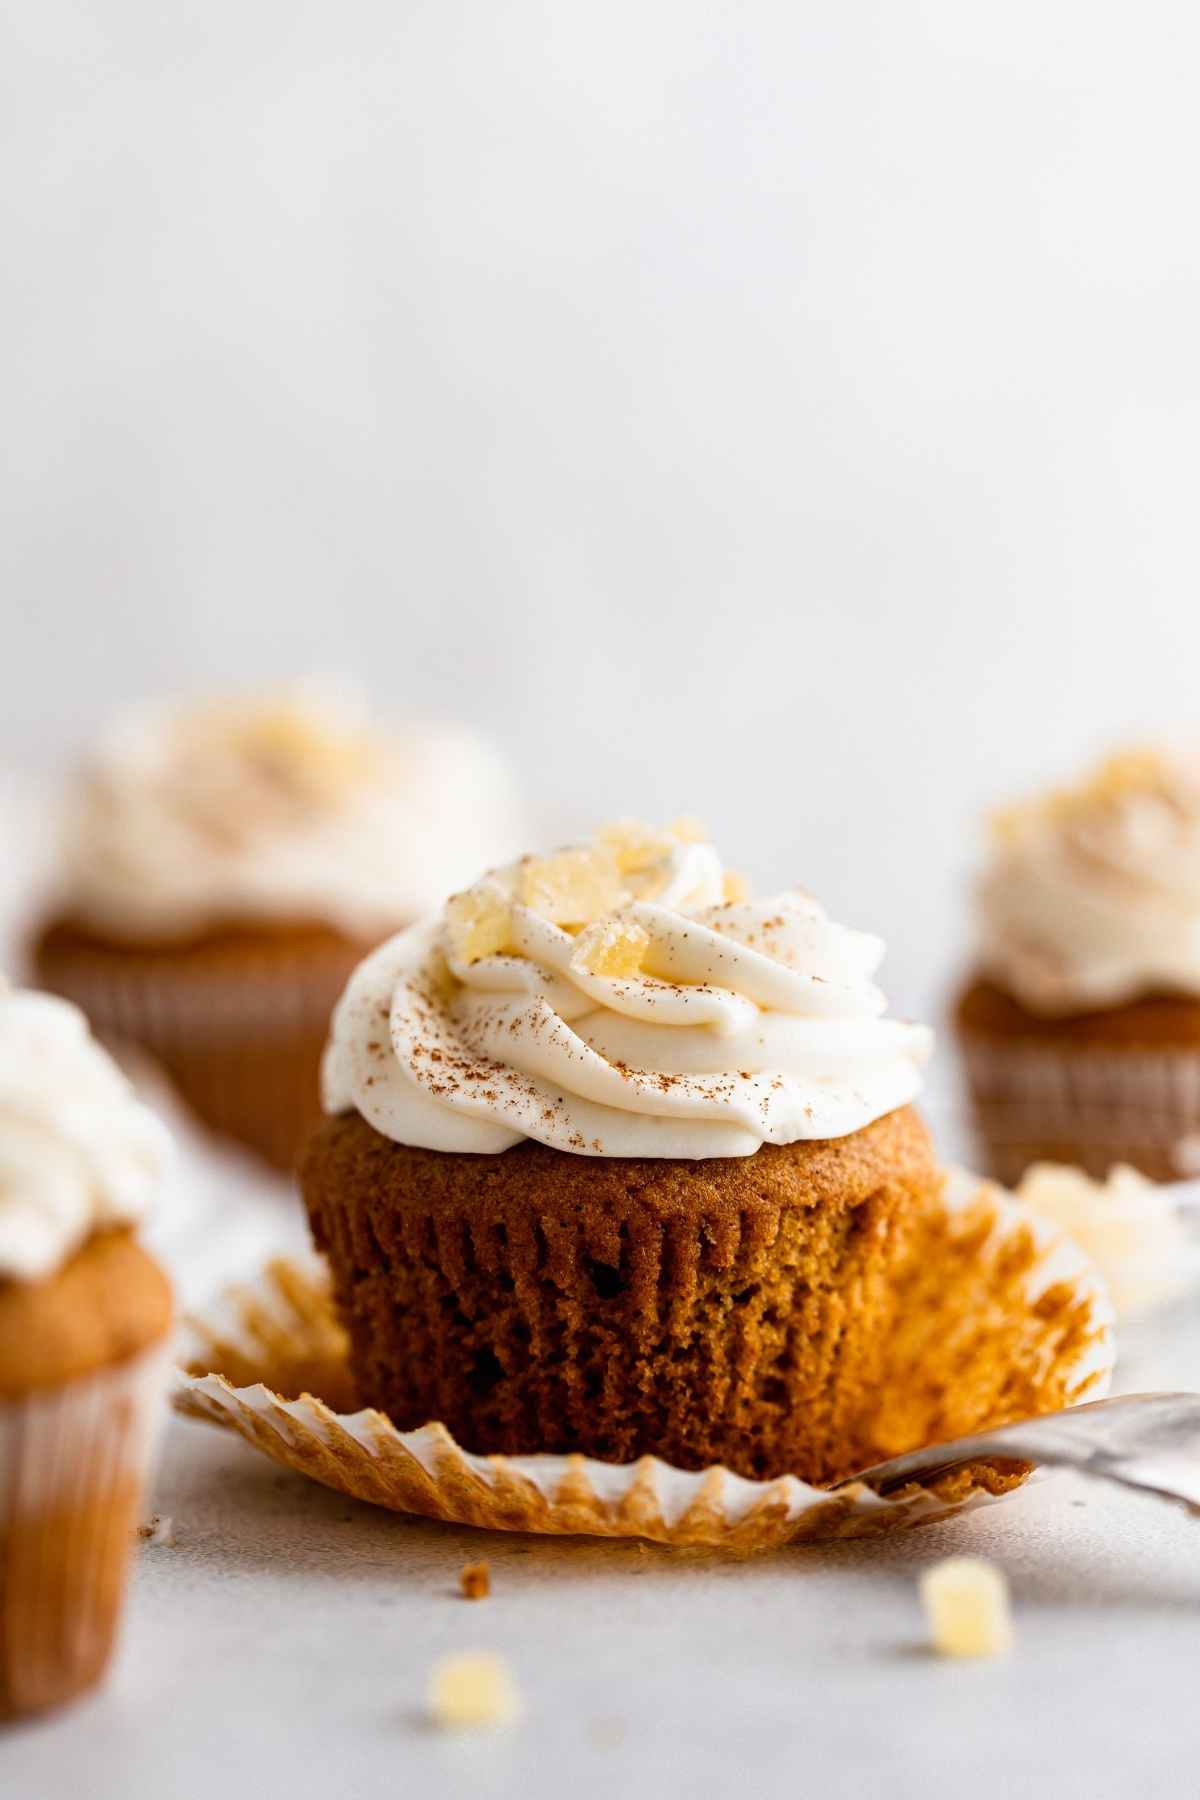 Pumpkin Ginger Cupcakes with cream cheese frosting swirl and candied ginger garnish